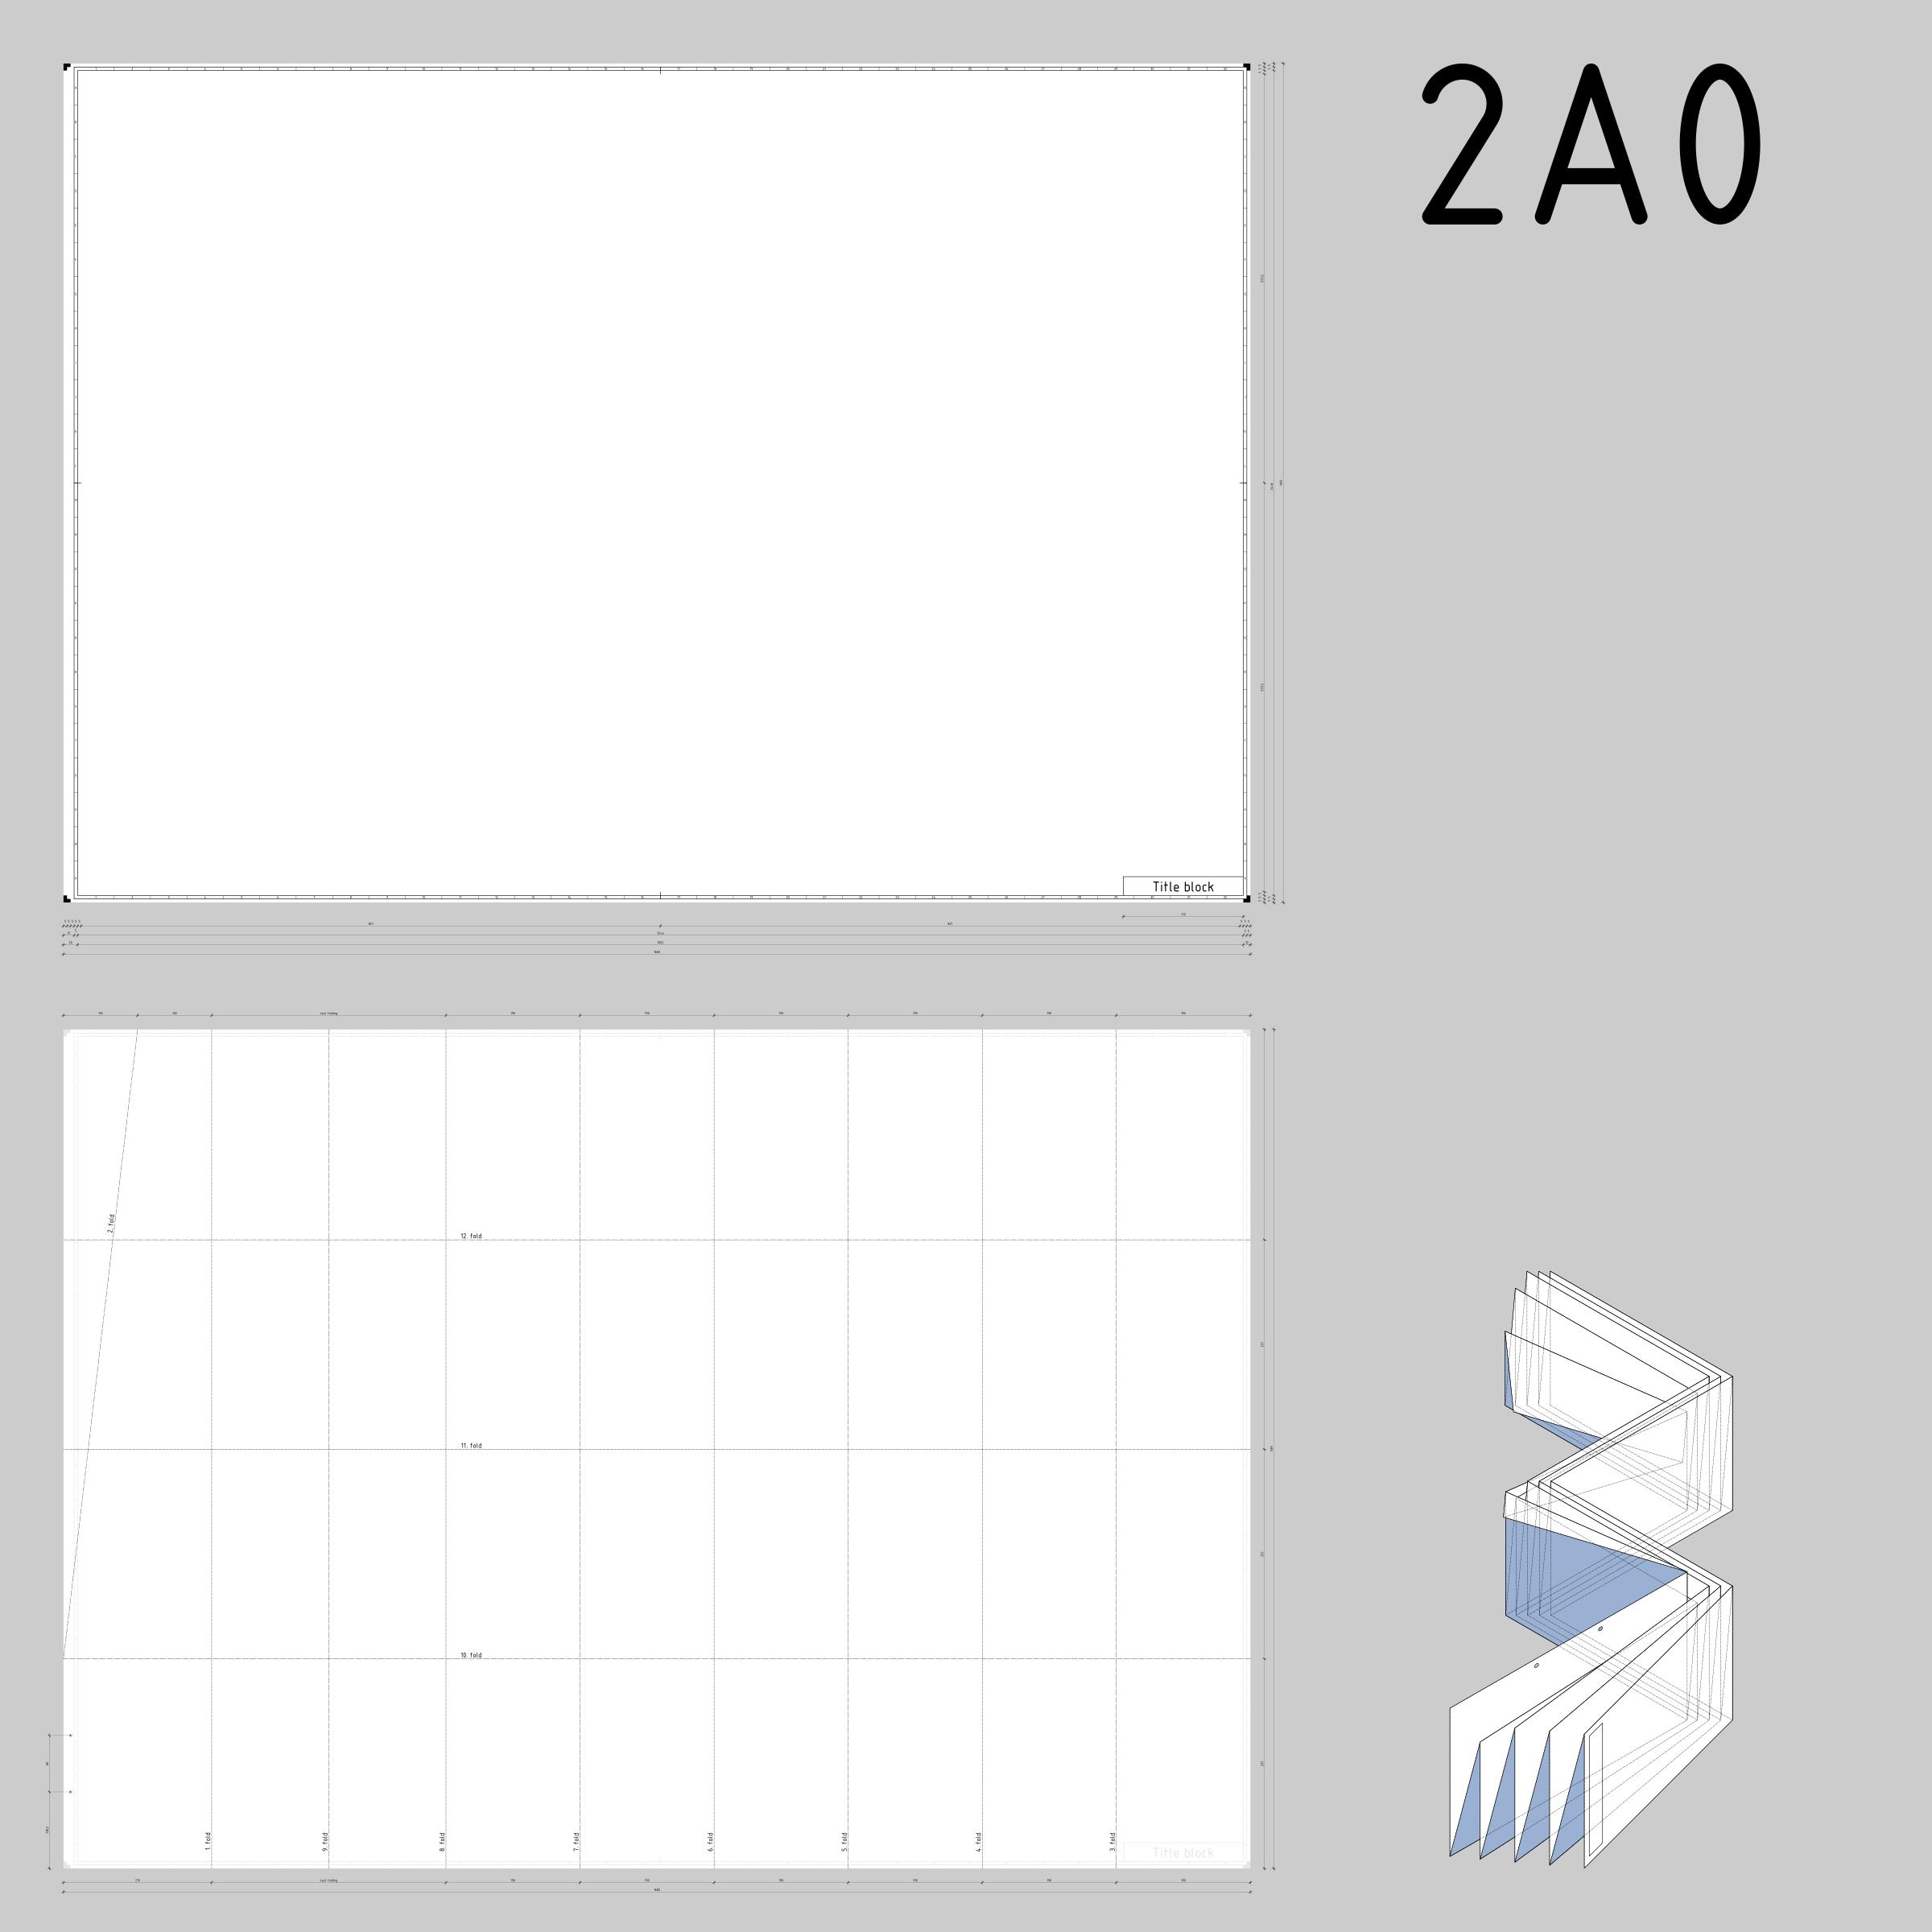 DIN 2A0 technical drawing format and folding png